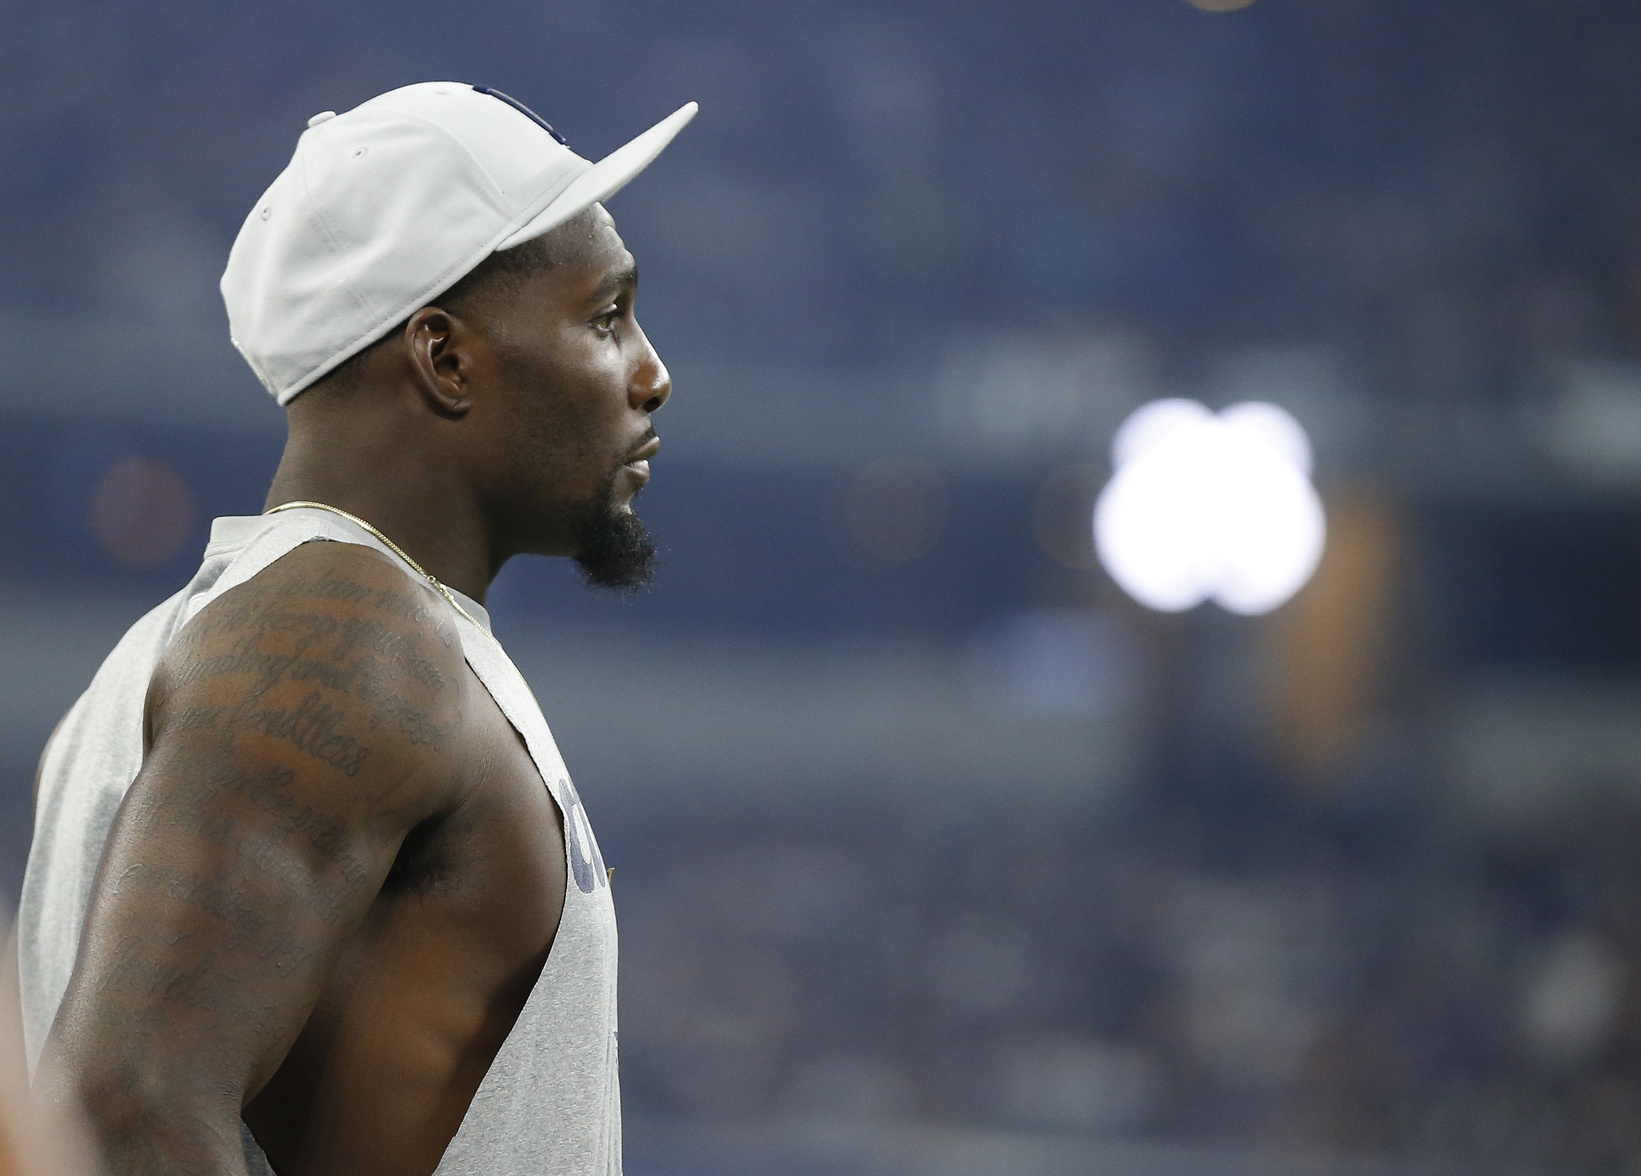 Saints reportedly still want Dez Bryant back in 20191641 x 1176